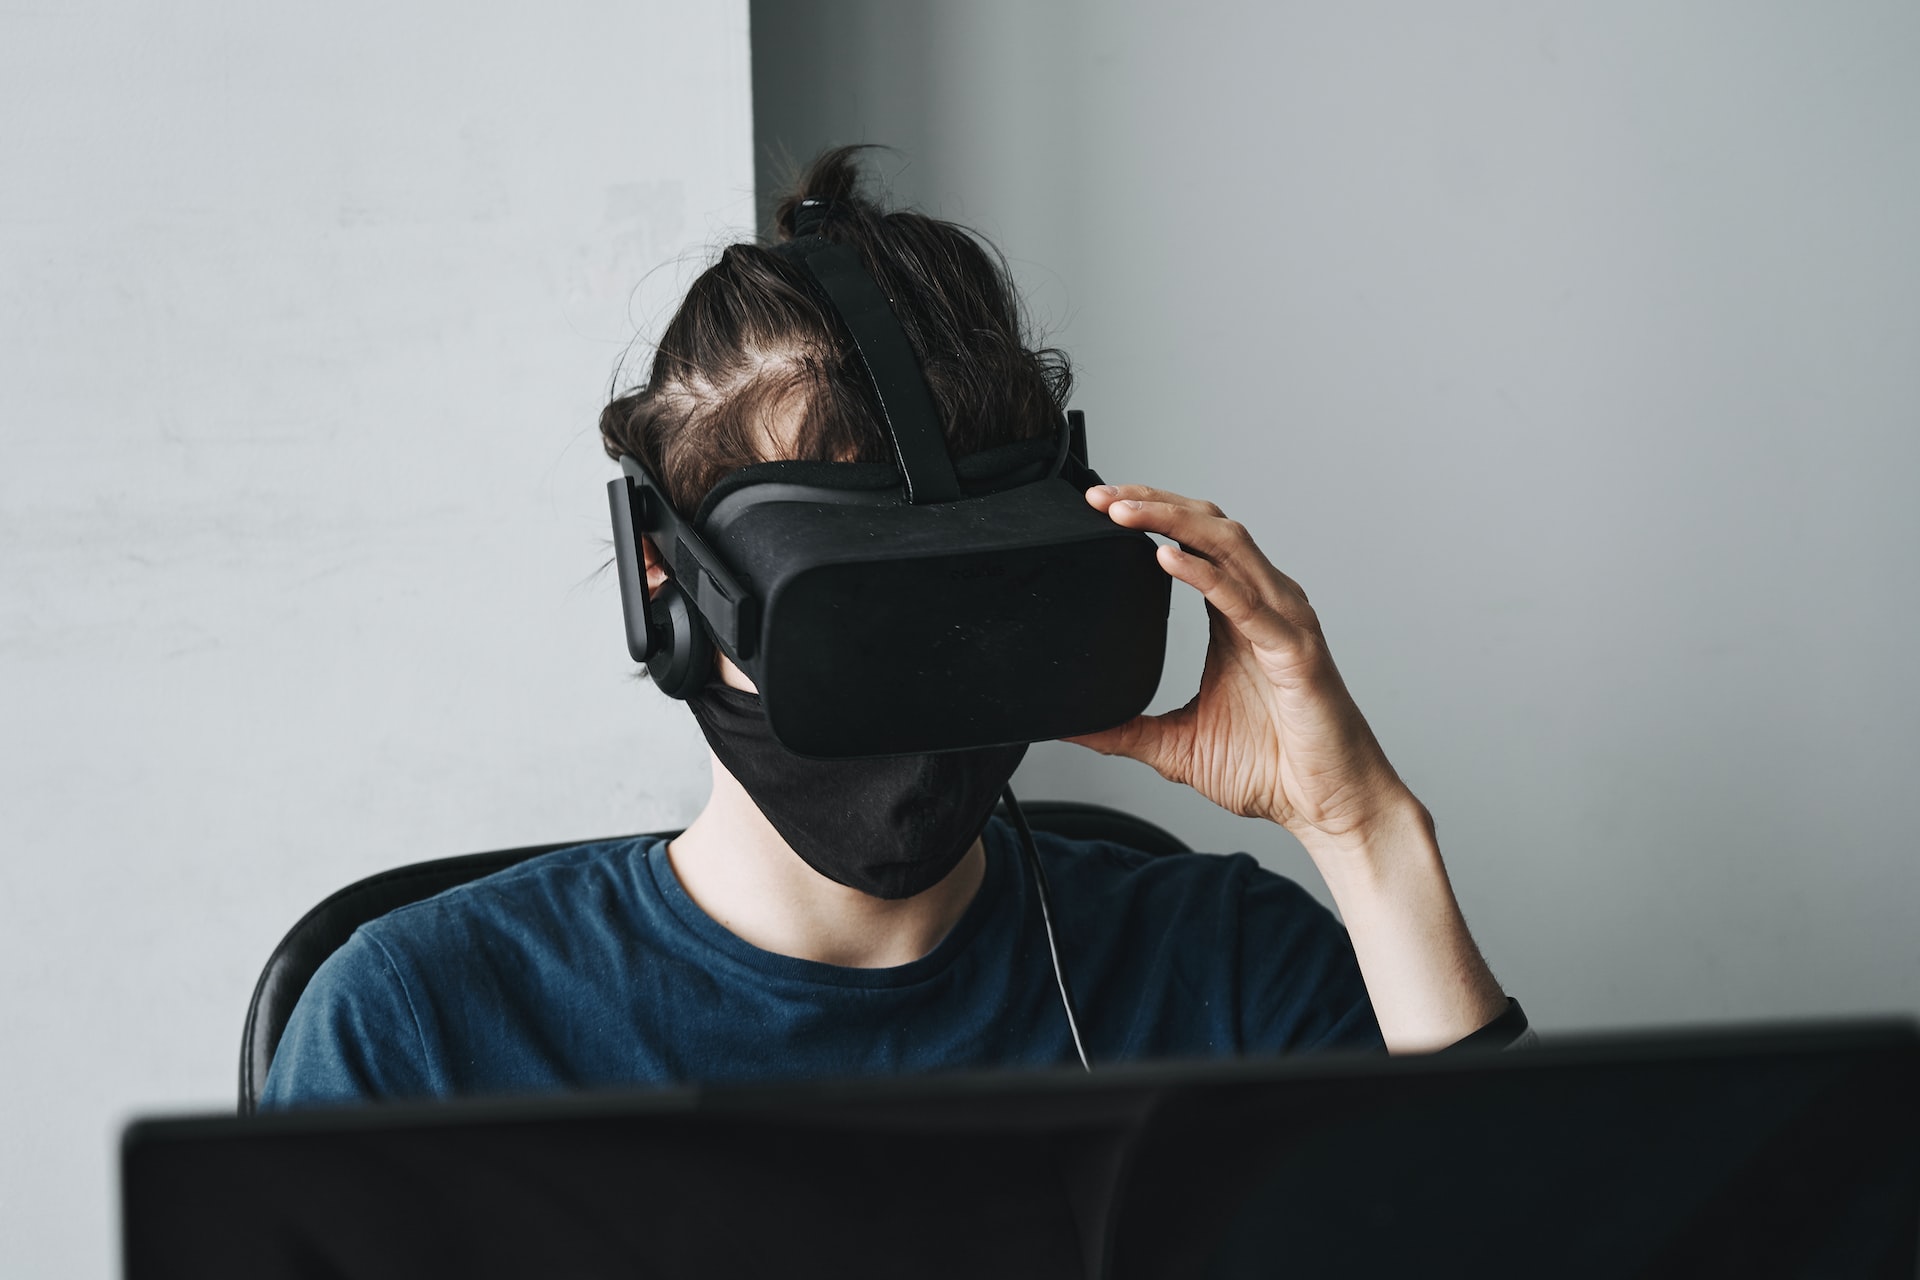 why is virtual reality so popular